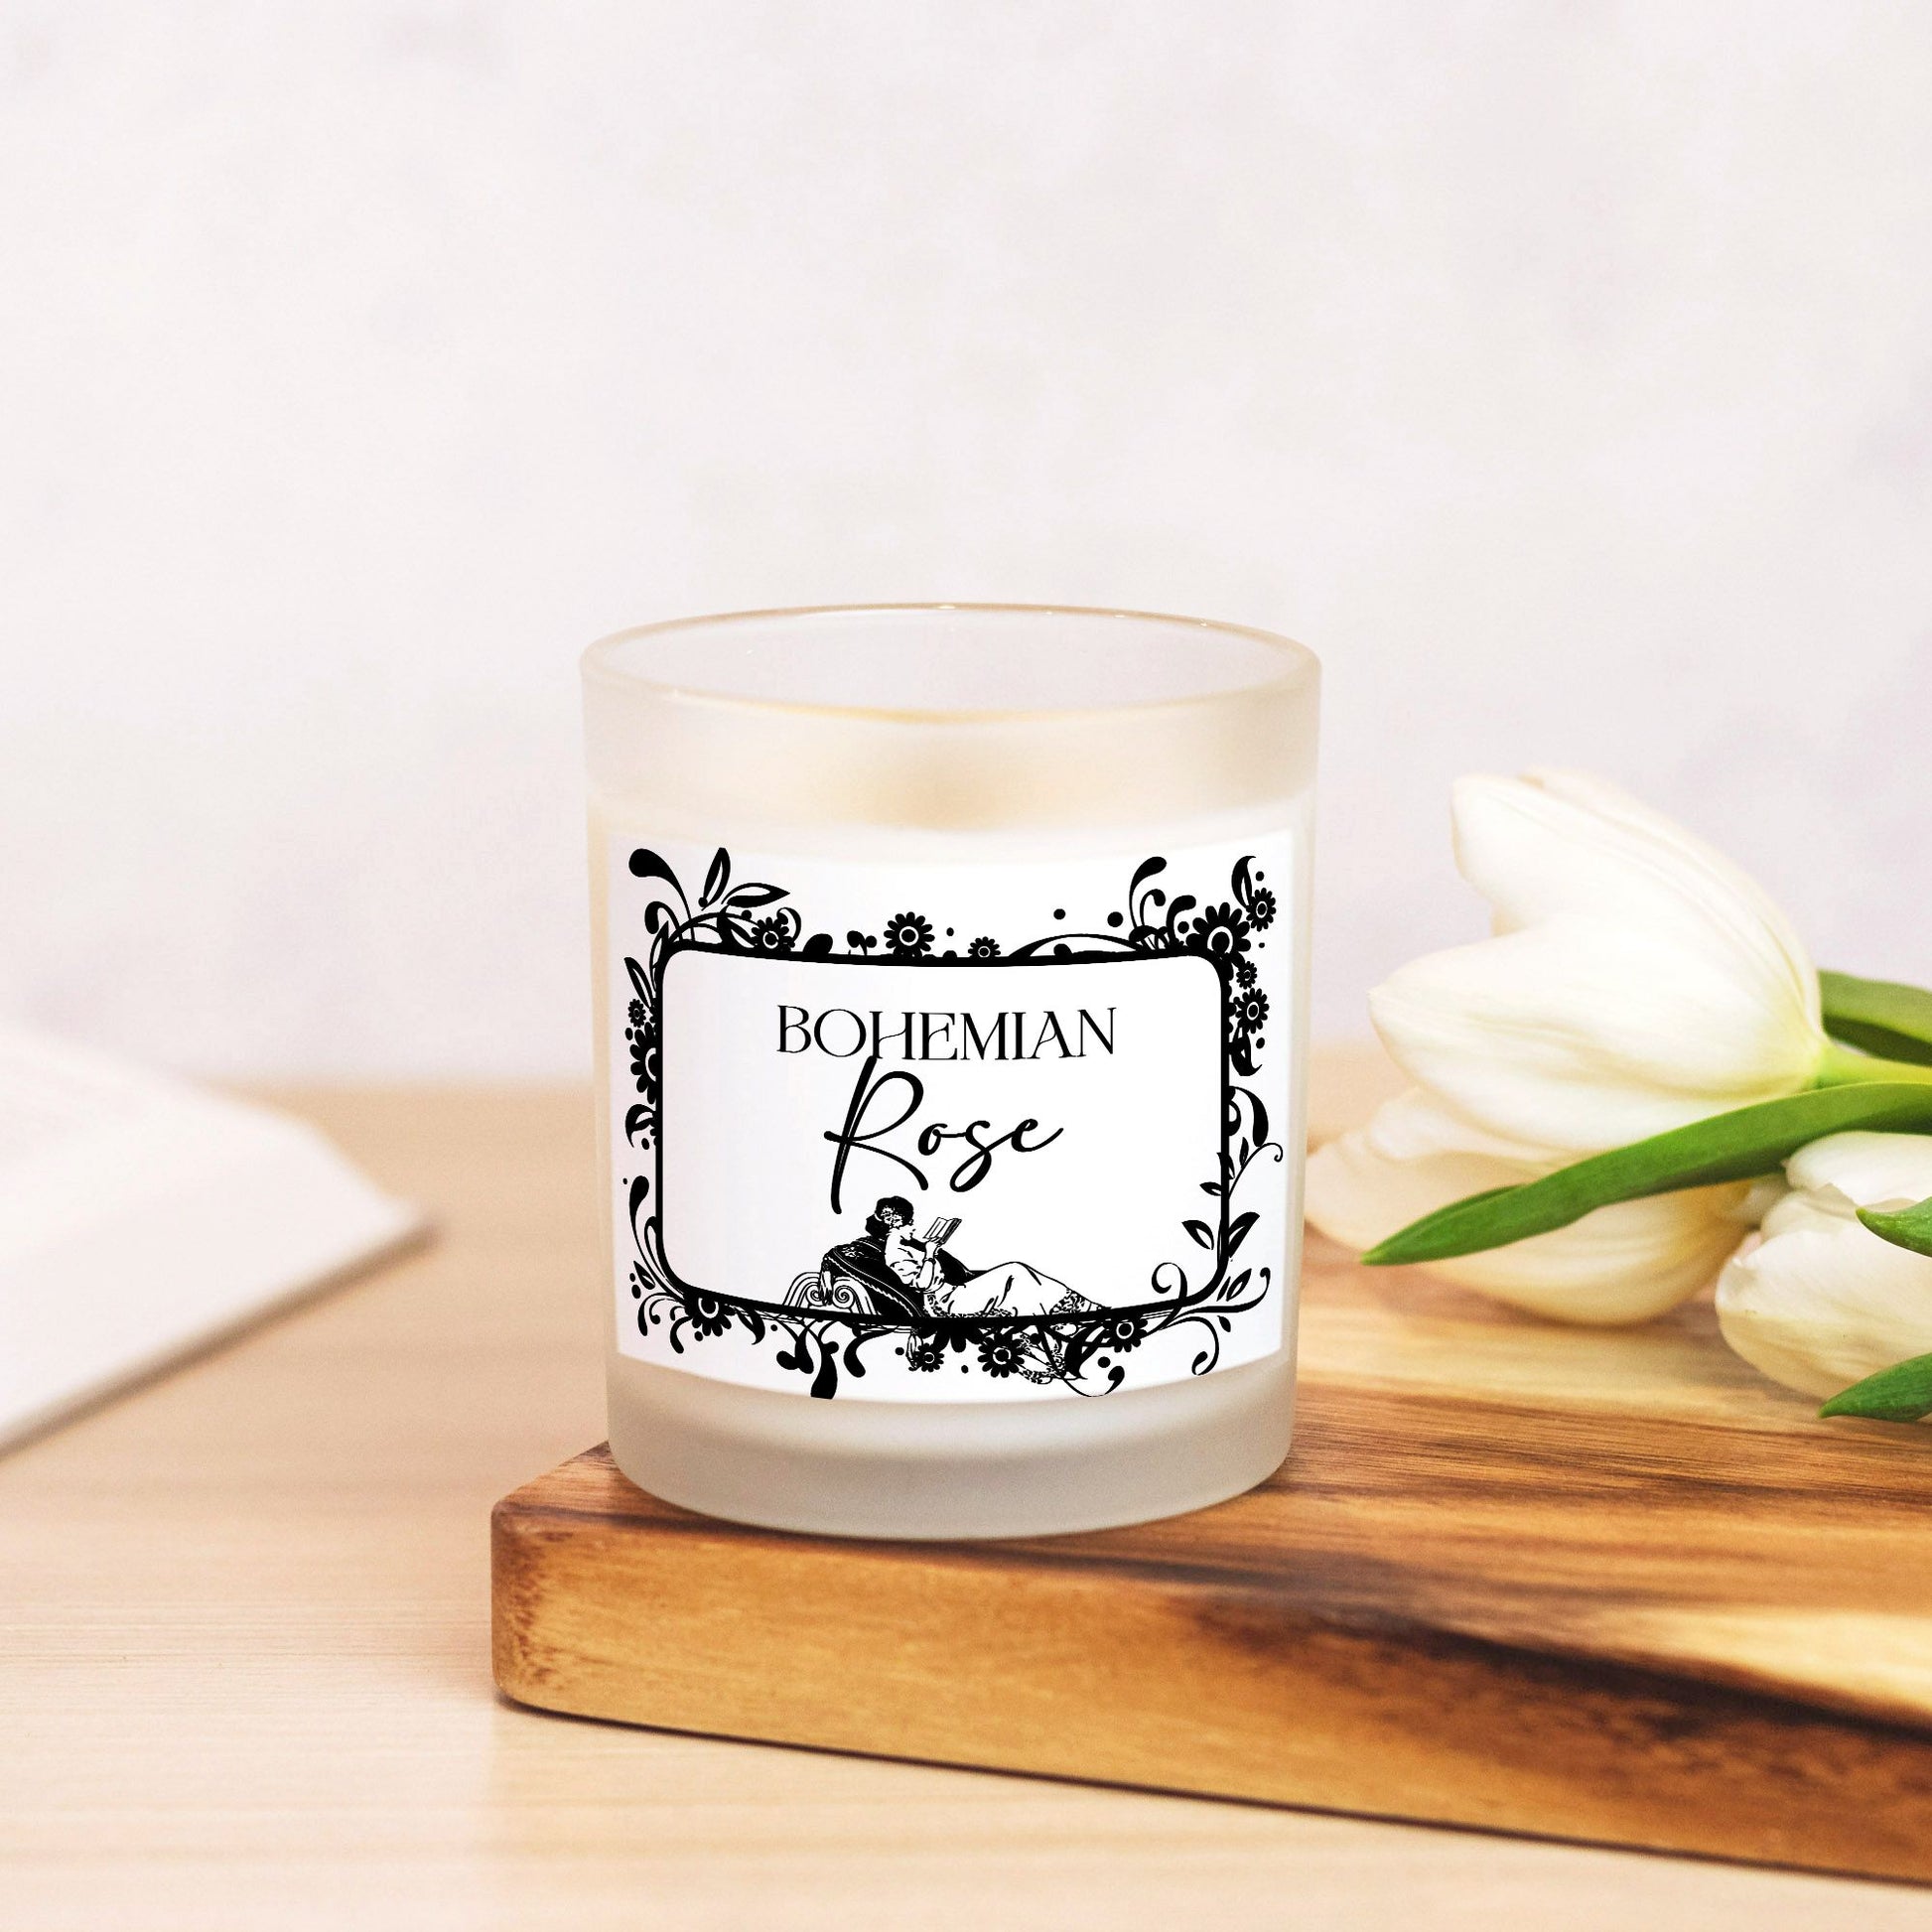 Bohemian Rose Candle Frosted Glass (Hand Poured 11 oz)